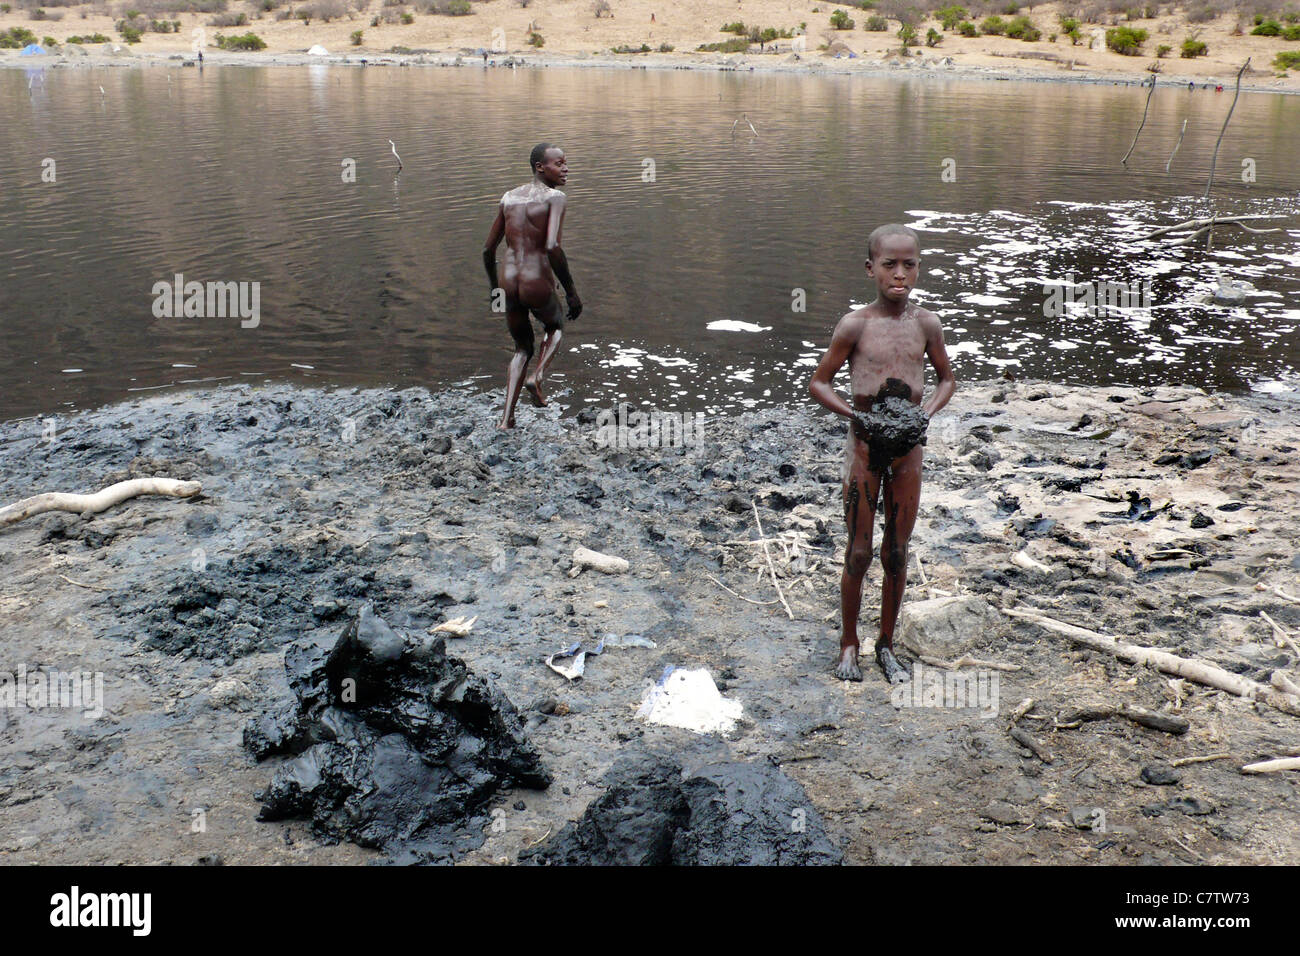 Ethiopia, South Omo Valley, el Sod crater lake, children at work Stock Photo